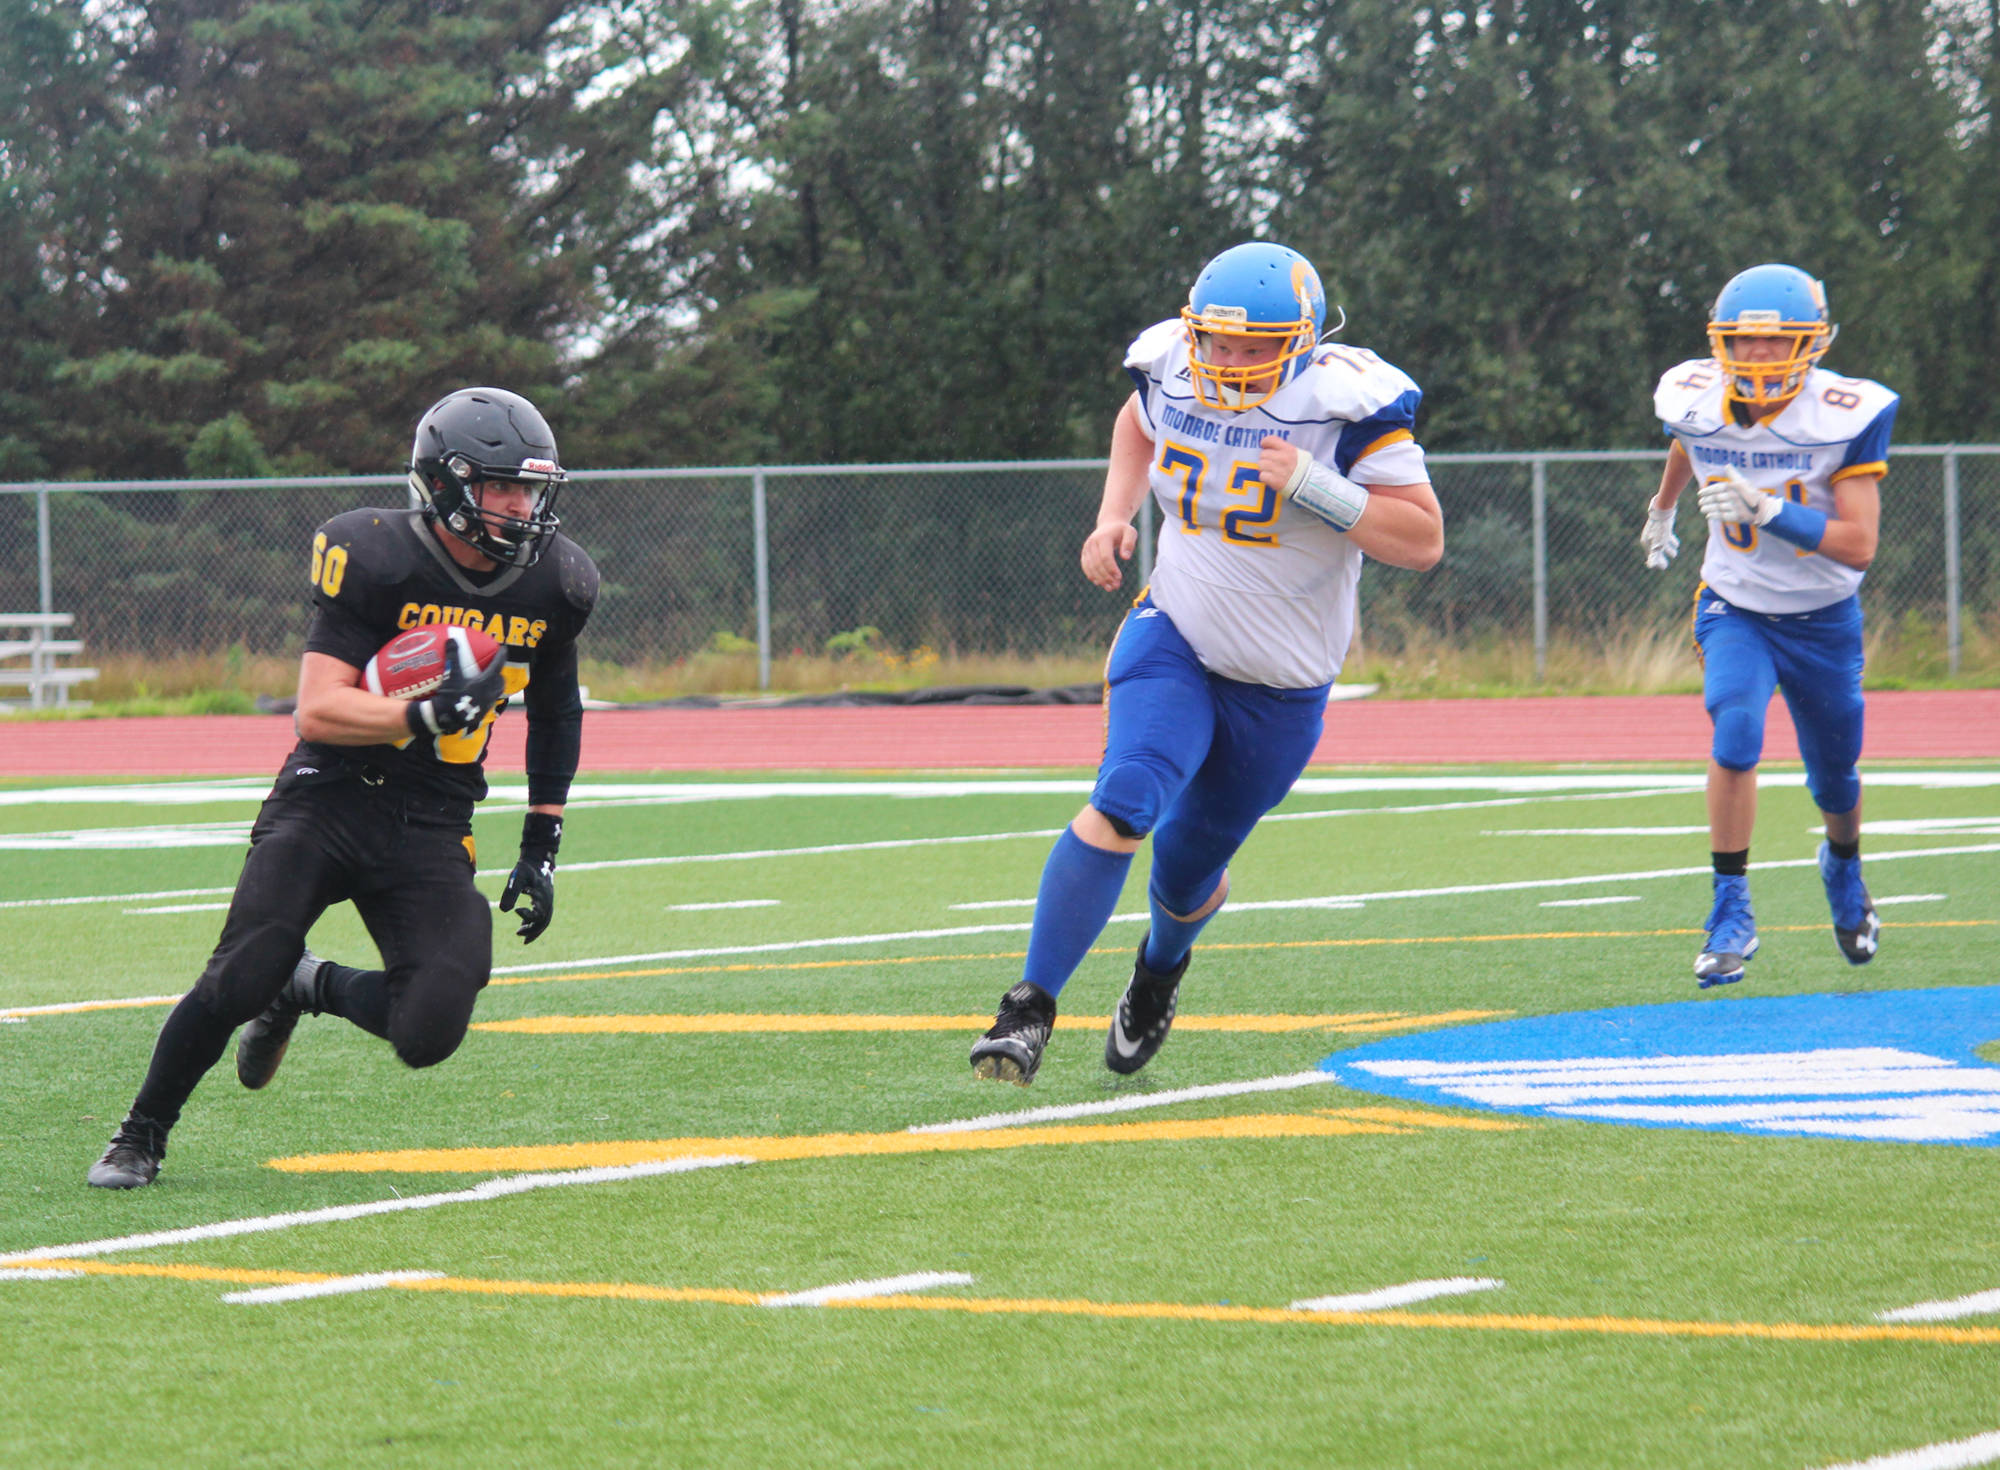 Senior David Sanarov runs the ball for the Voznesenka Cougars during their game against Monroe Catholic High School on Saturday, Aug. 26, 2017 at the Homer Mariners field in Homer, Alaska. The Fairbanks team crushed the Cougars 26-0. (Photo by Megan Pacer/Homer News)